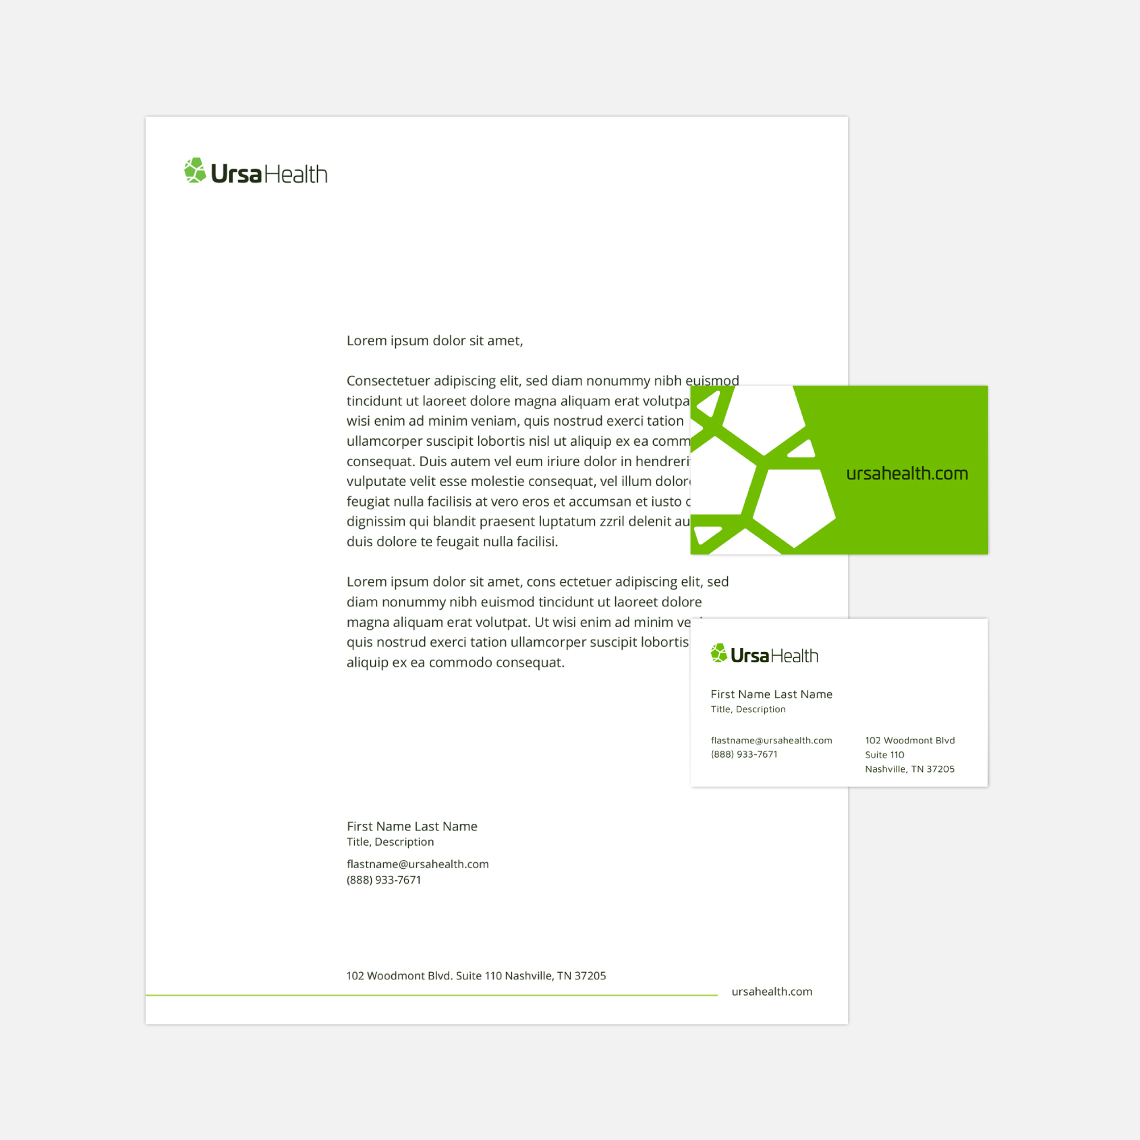 Examples of the design system applied to printed material including letter and business cards.